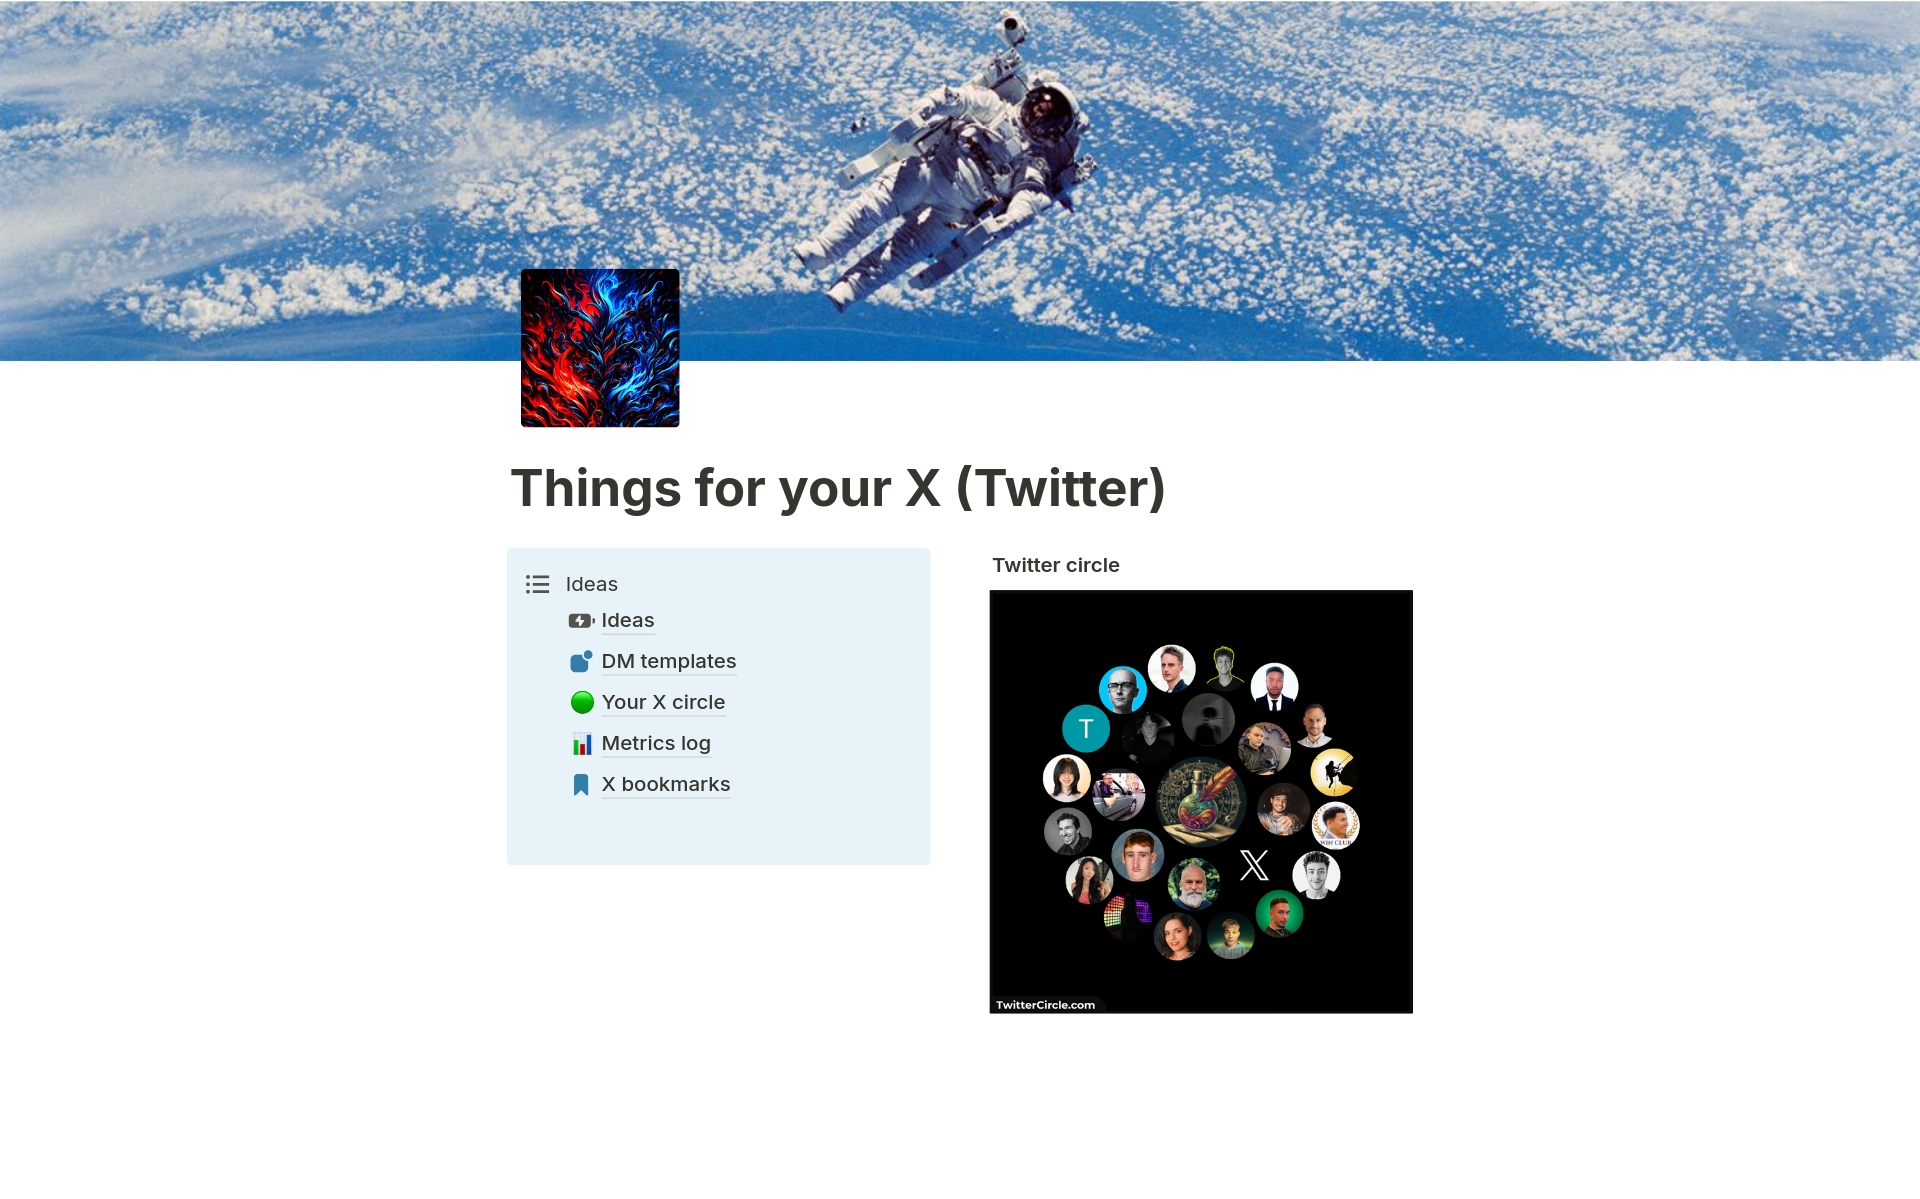 Things for Your X (Twitter) is a uniquely curated template for the needs of Twitter users who need to manage things in the more curated way 